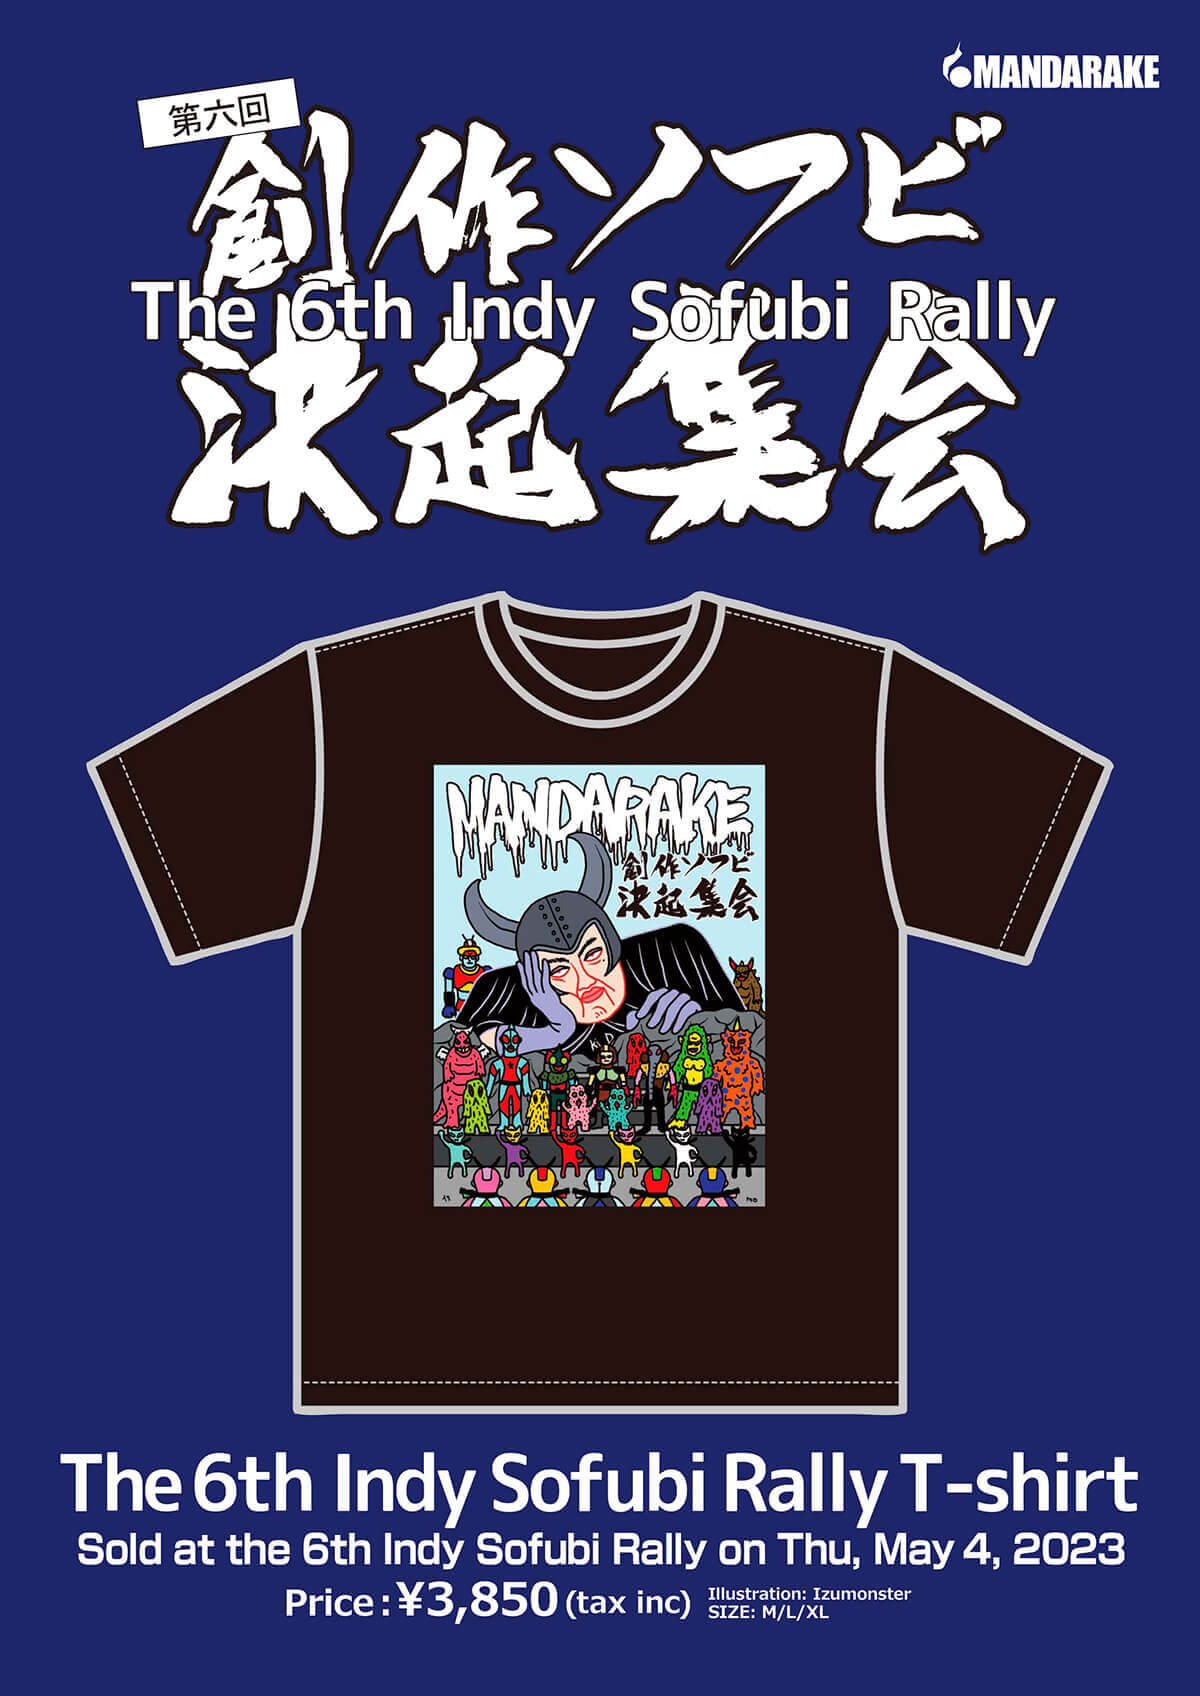 The 6th Indy Sofubi Rally T-shirt - Sold at the 6th Indy Sofubi Rally on Thu, May 4, 2023 - ¥3,850 (tax inc)